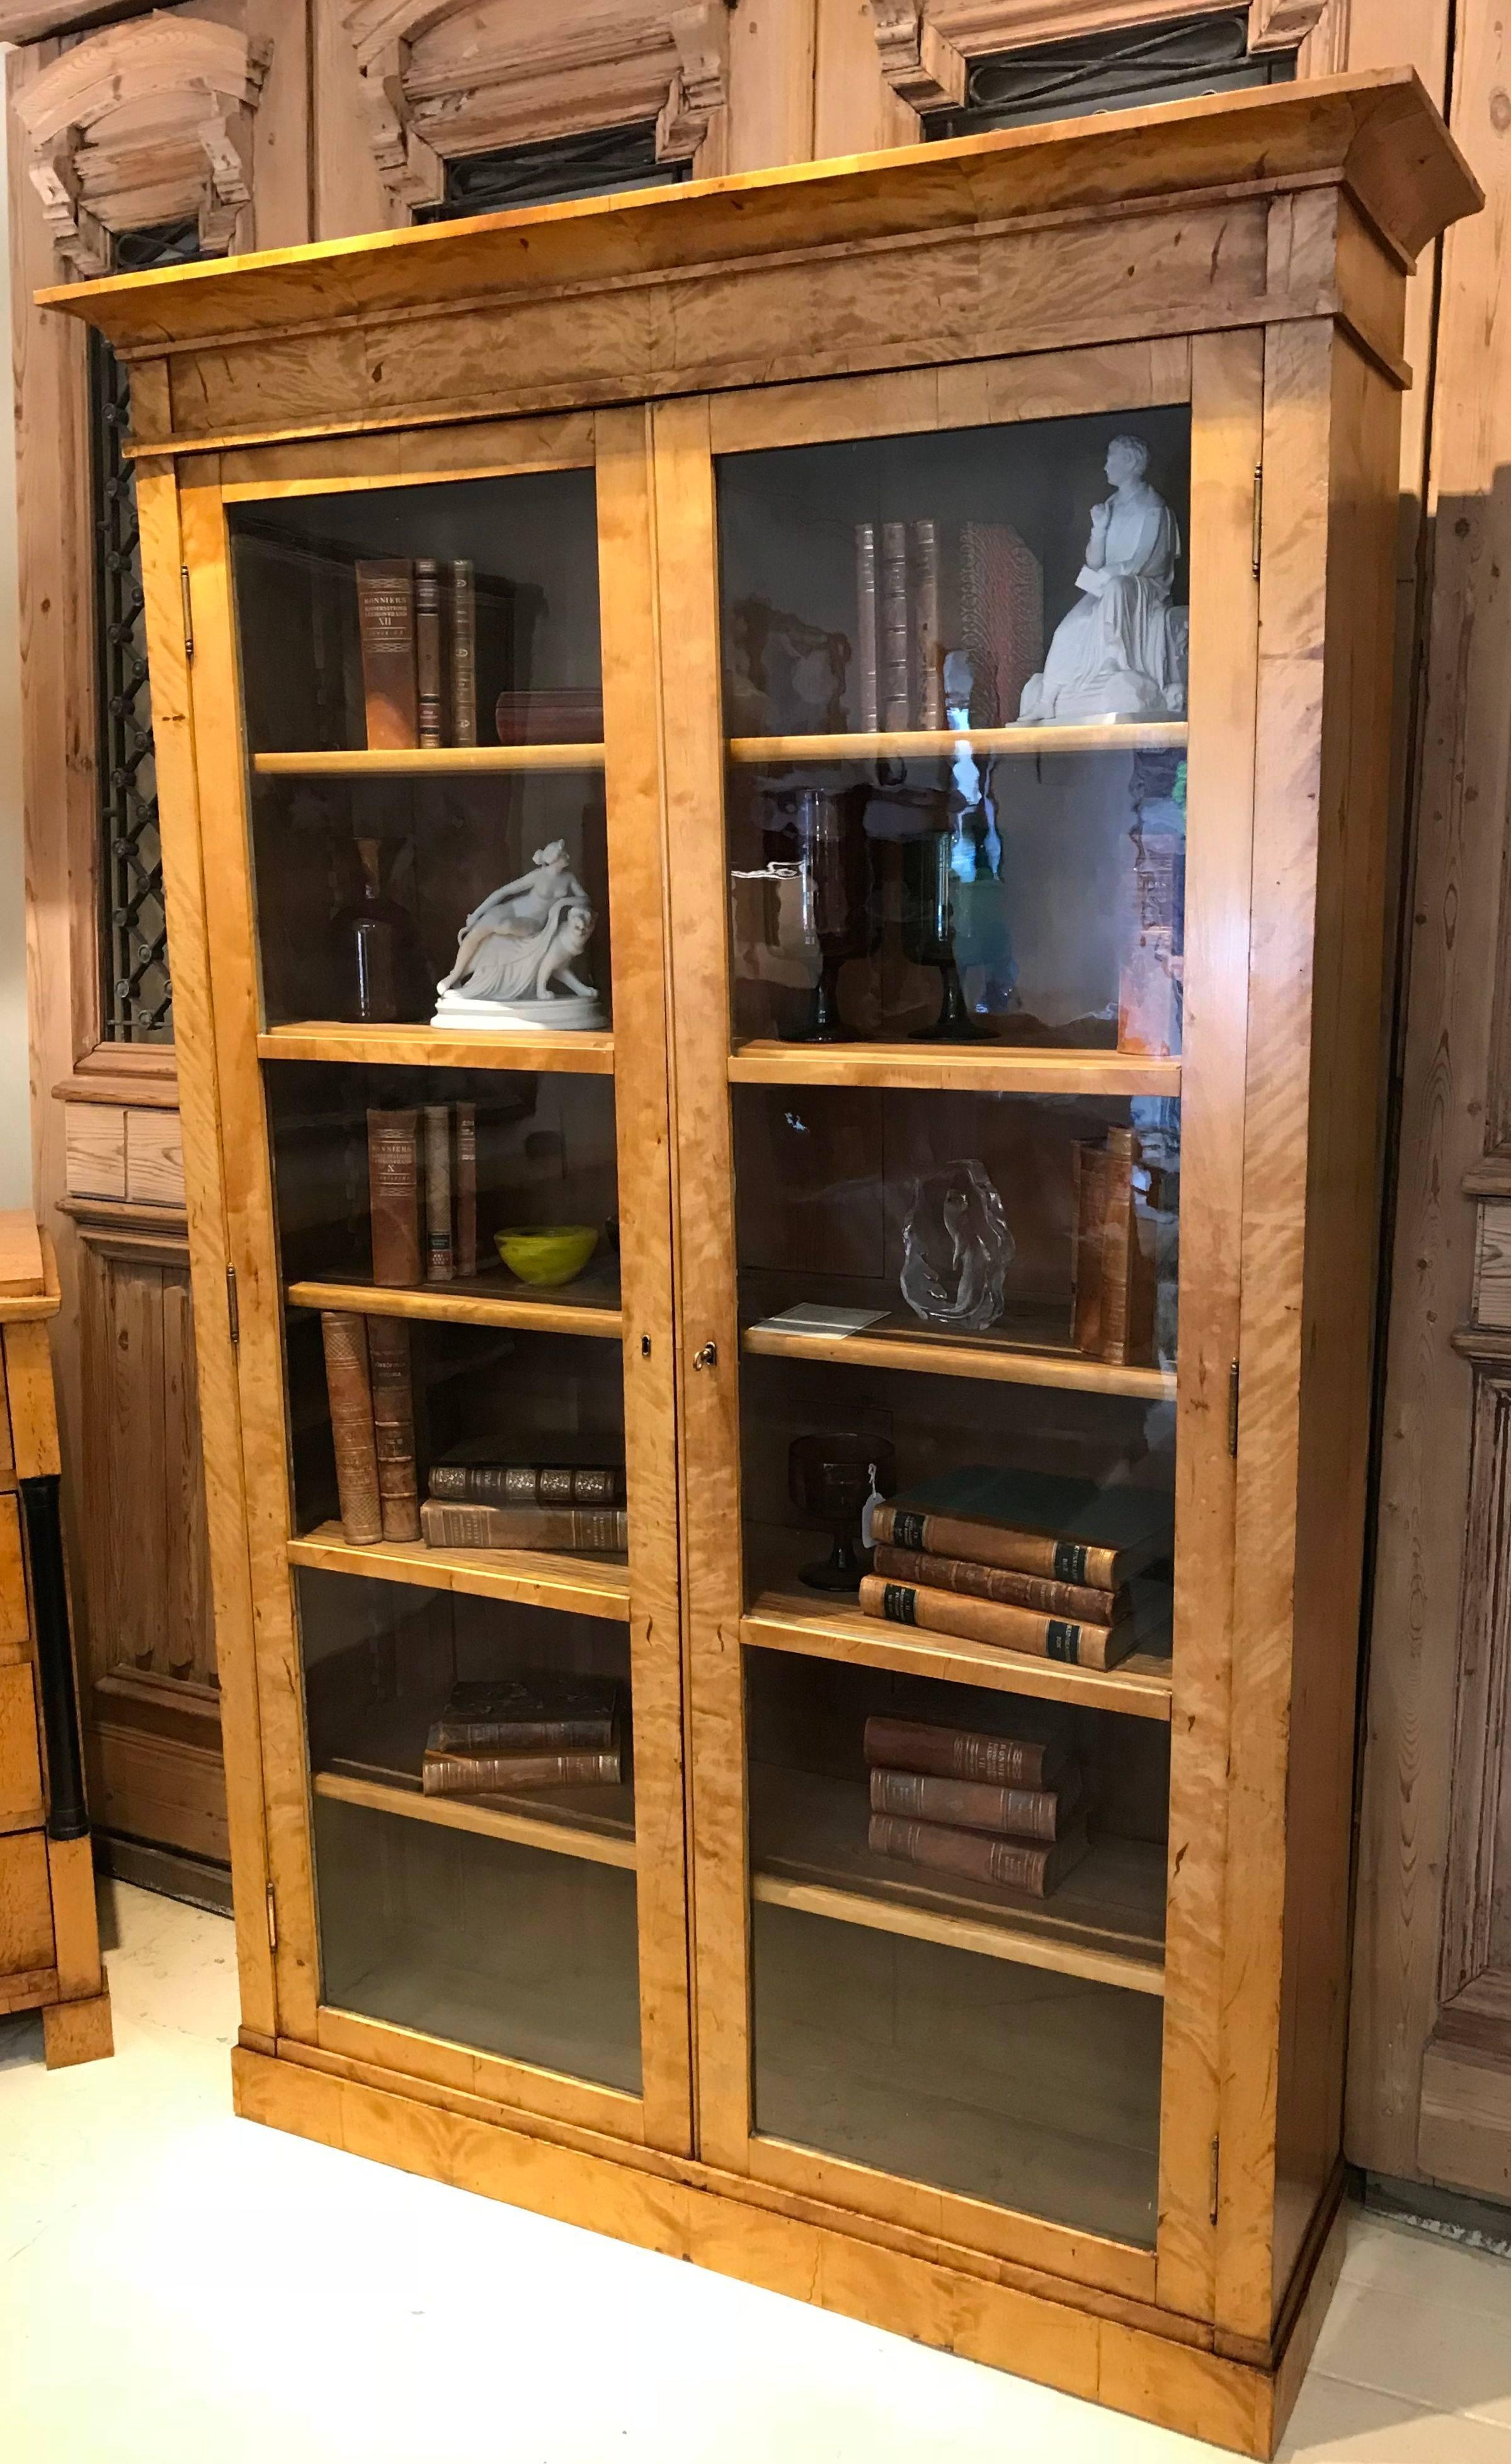 Swedish Biedermeier flame birch glass door bookcase with the original hand drawn glass panes. The shelves are all adjustable. Classical clean lines which are timeless. This bookcase has an elegant simplicity and would blend well into any setting